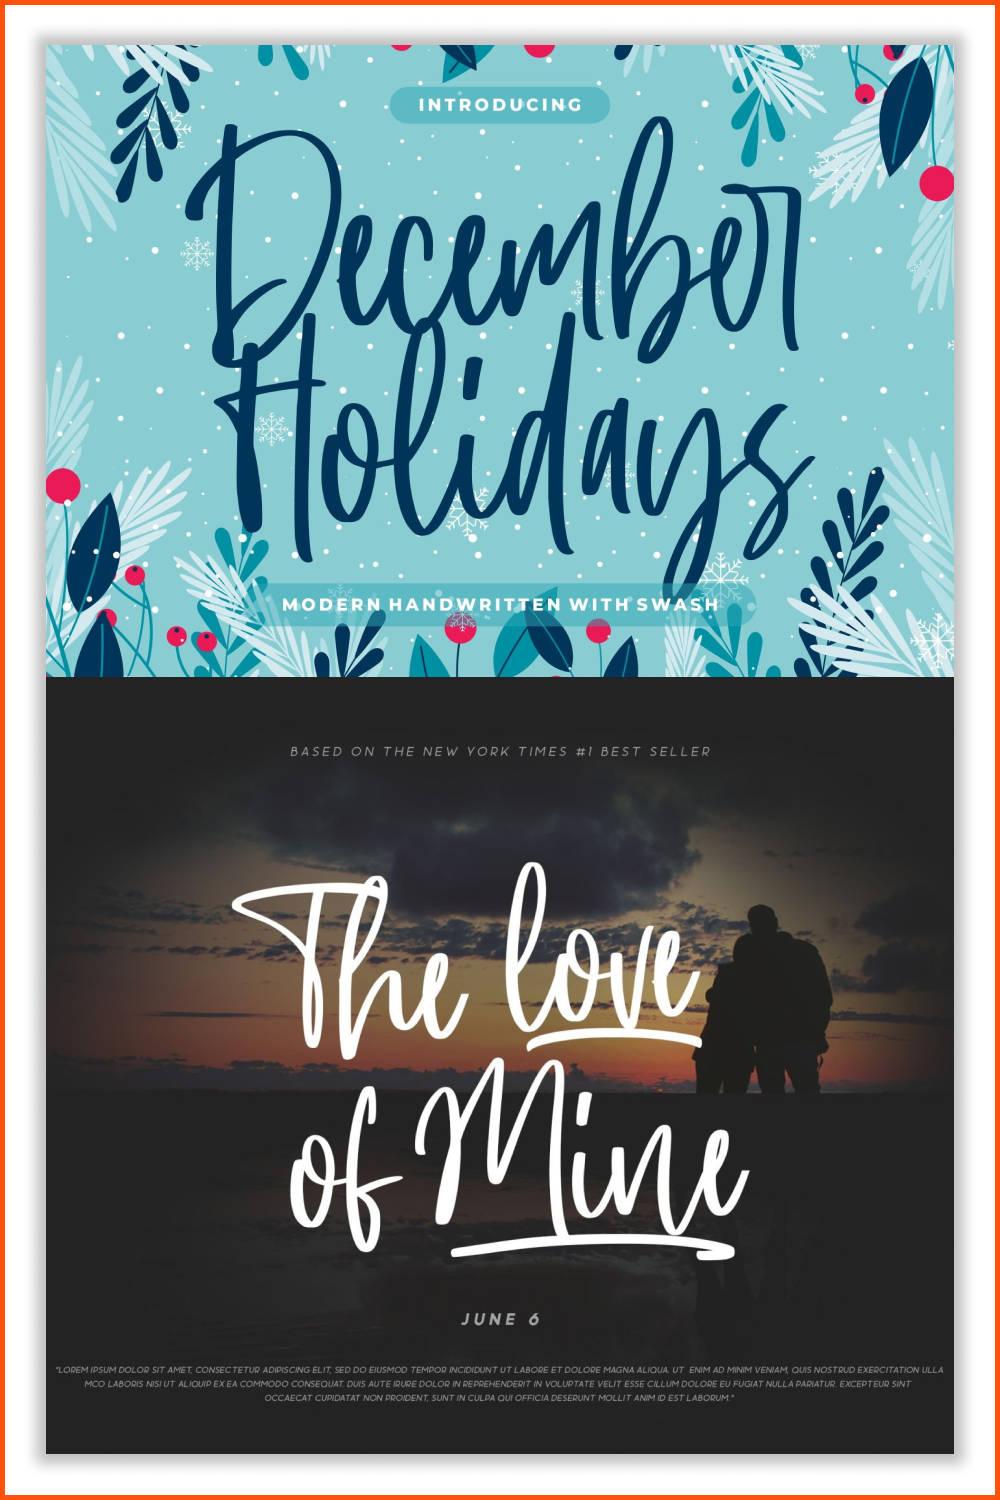 Beautiful handwritten font on a blue background and on the background of a photo with a sunset.